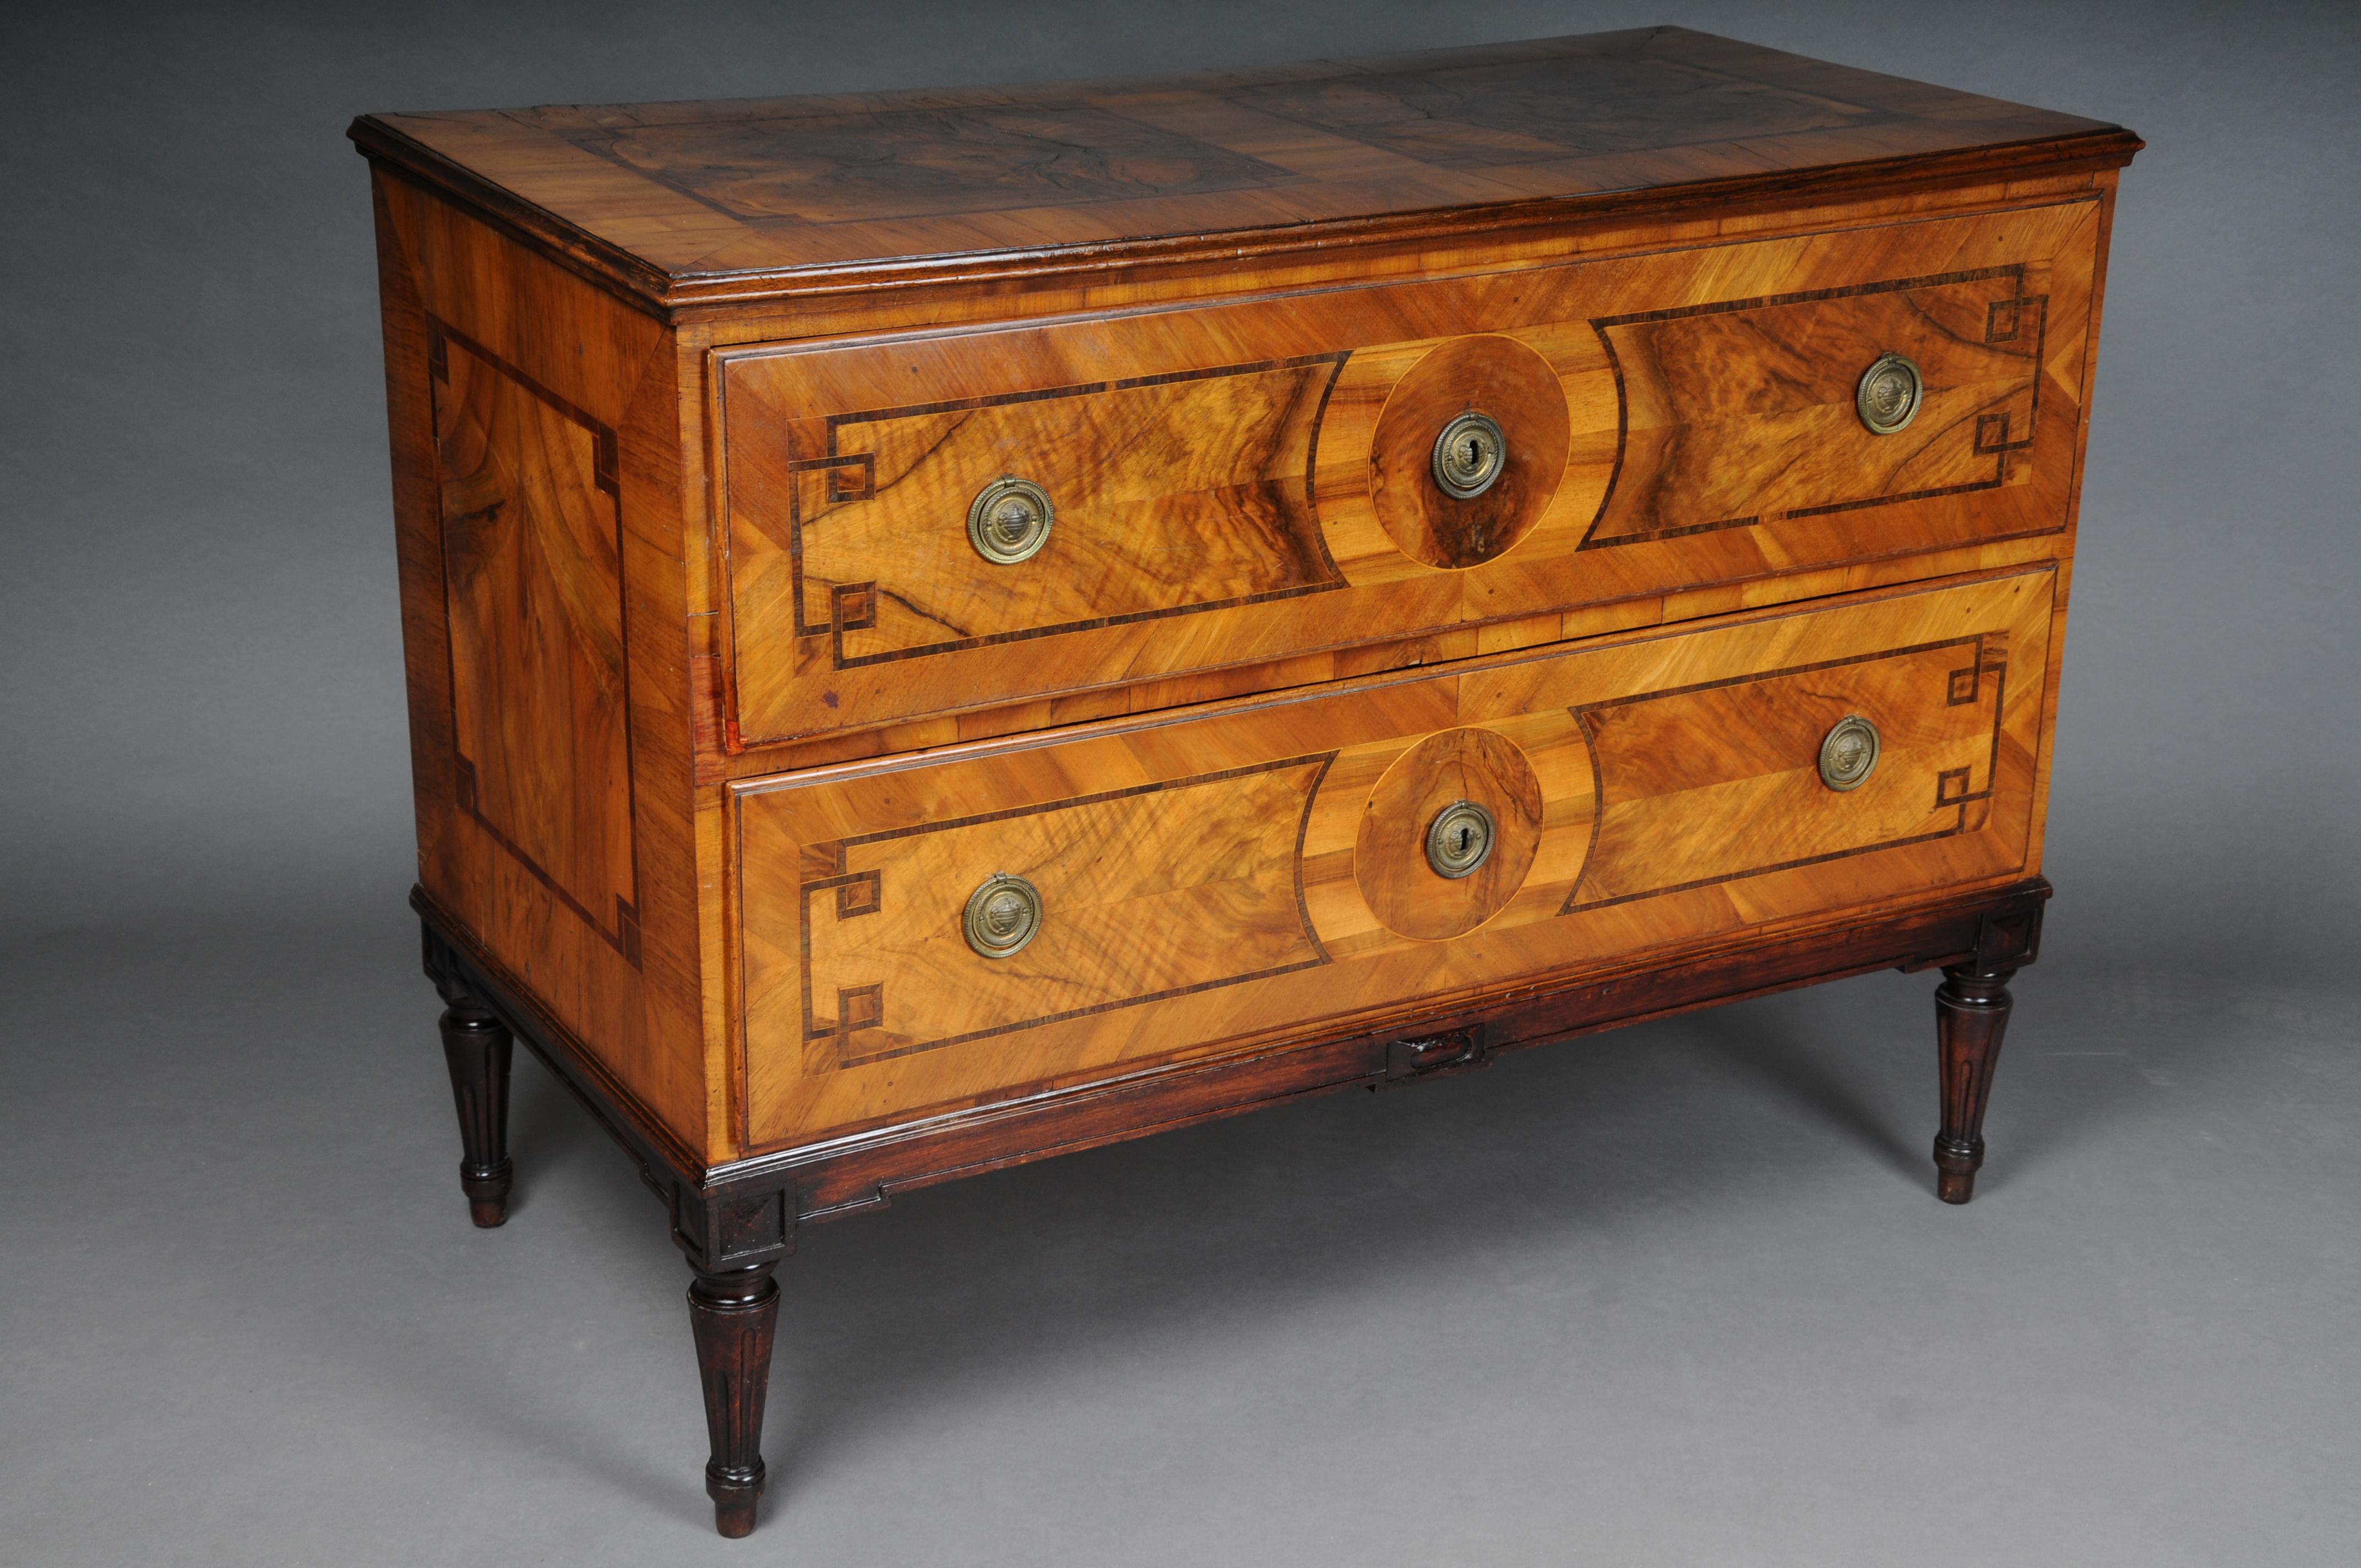 Courtly classical chest of drawers, South German around 1780

Solid wood wood, walnut veneer with fine wood thread wood inlays.

Cover plate partly with walnut root veneer fields.

two-legged body standing on canilated, pointed legs. Brass fittings